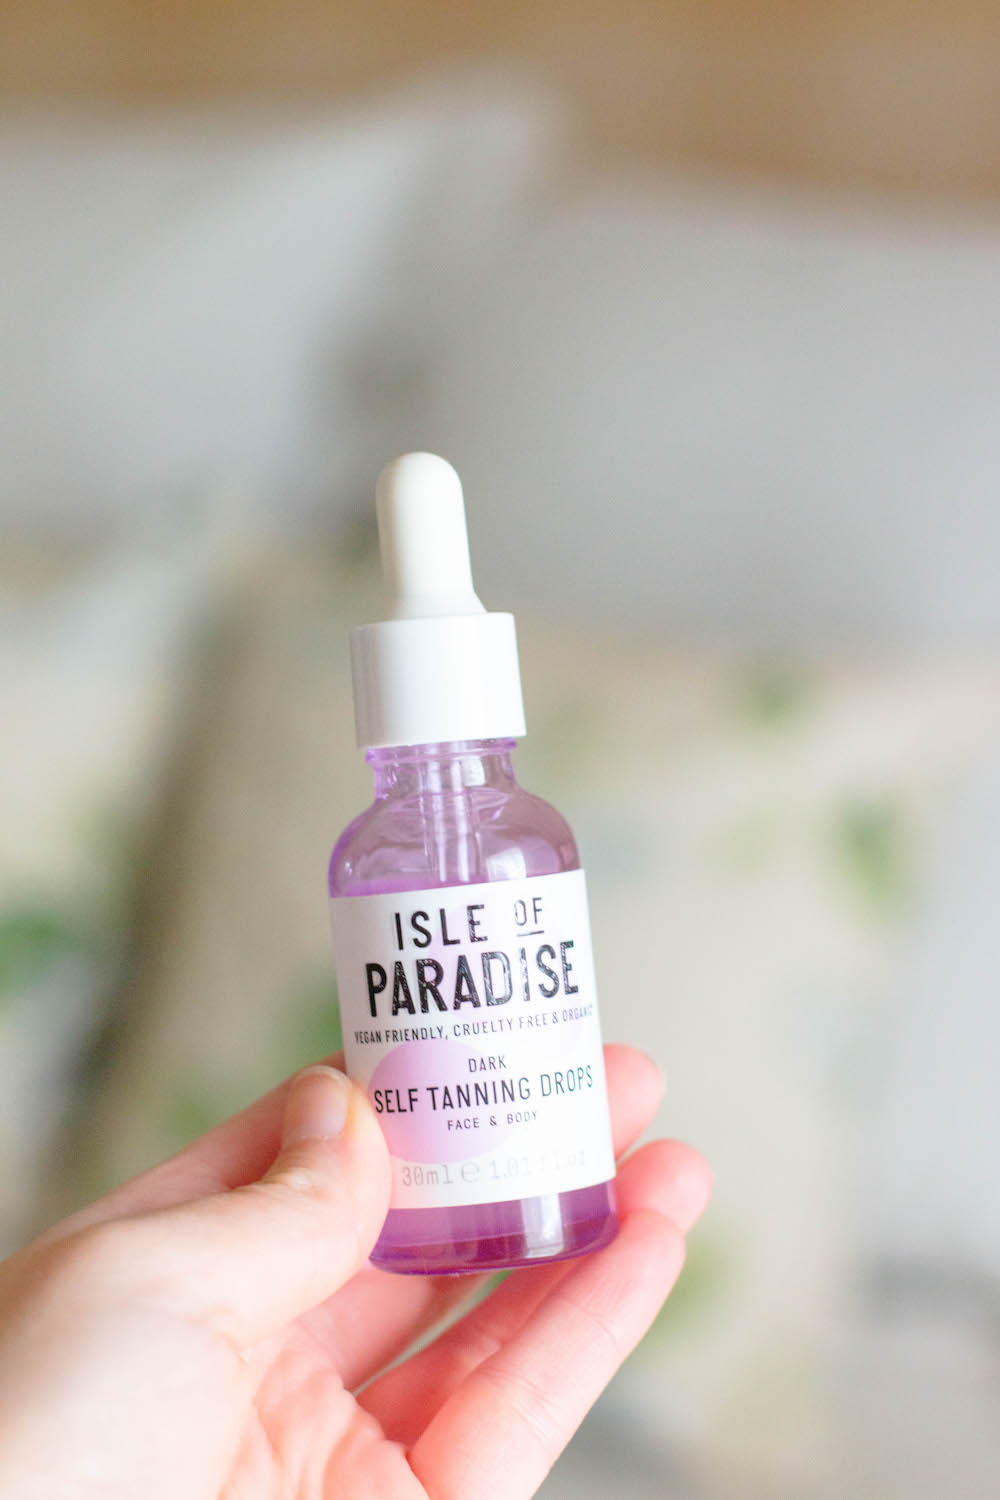 Isle of Paradise Tanning Drops Review! Isle of Paradise Self